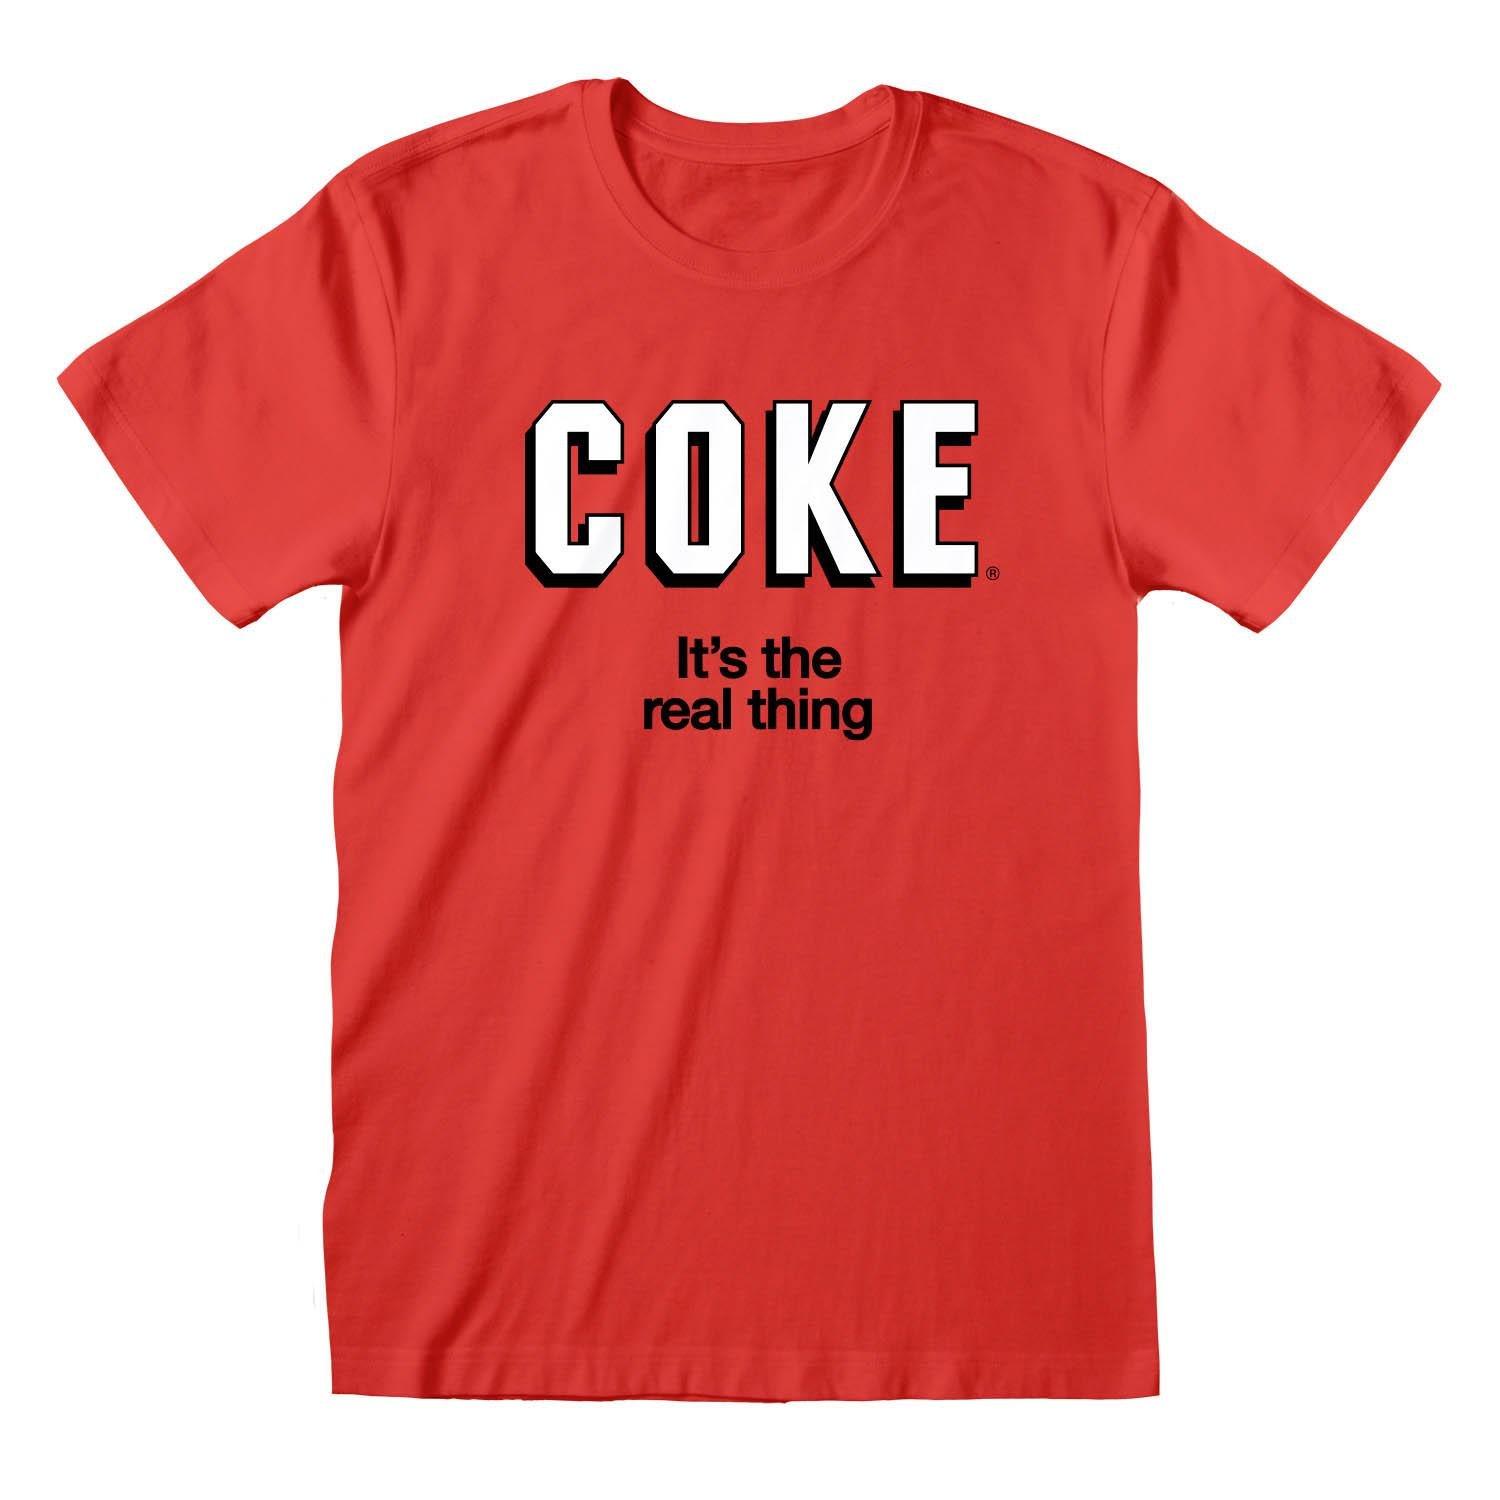 Image of Coca-Cola It's The Real Thing TShirt - XXL